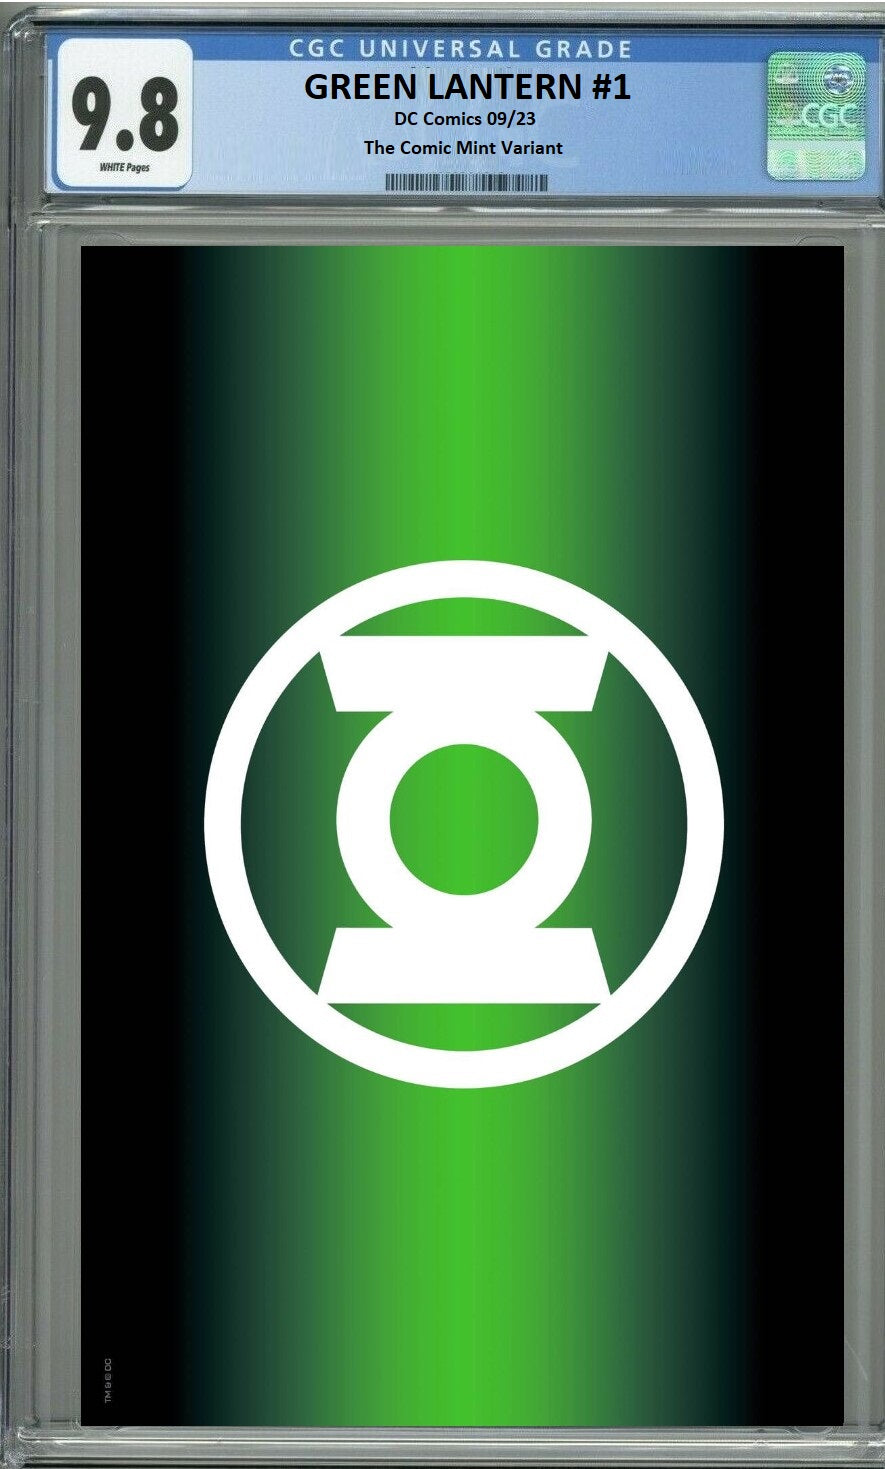 NYCC 2023 GREEN LANTERN #1 JUSTICE LEAGUE LOGO FOIL VARIANT LIMITED TO 1200 COPIES - RAW & GRADED OPTIONS